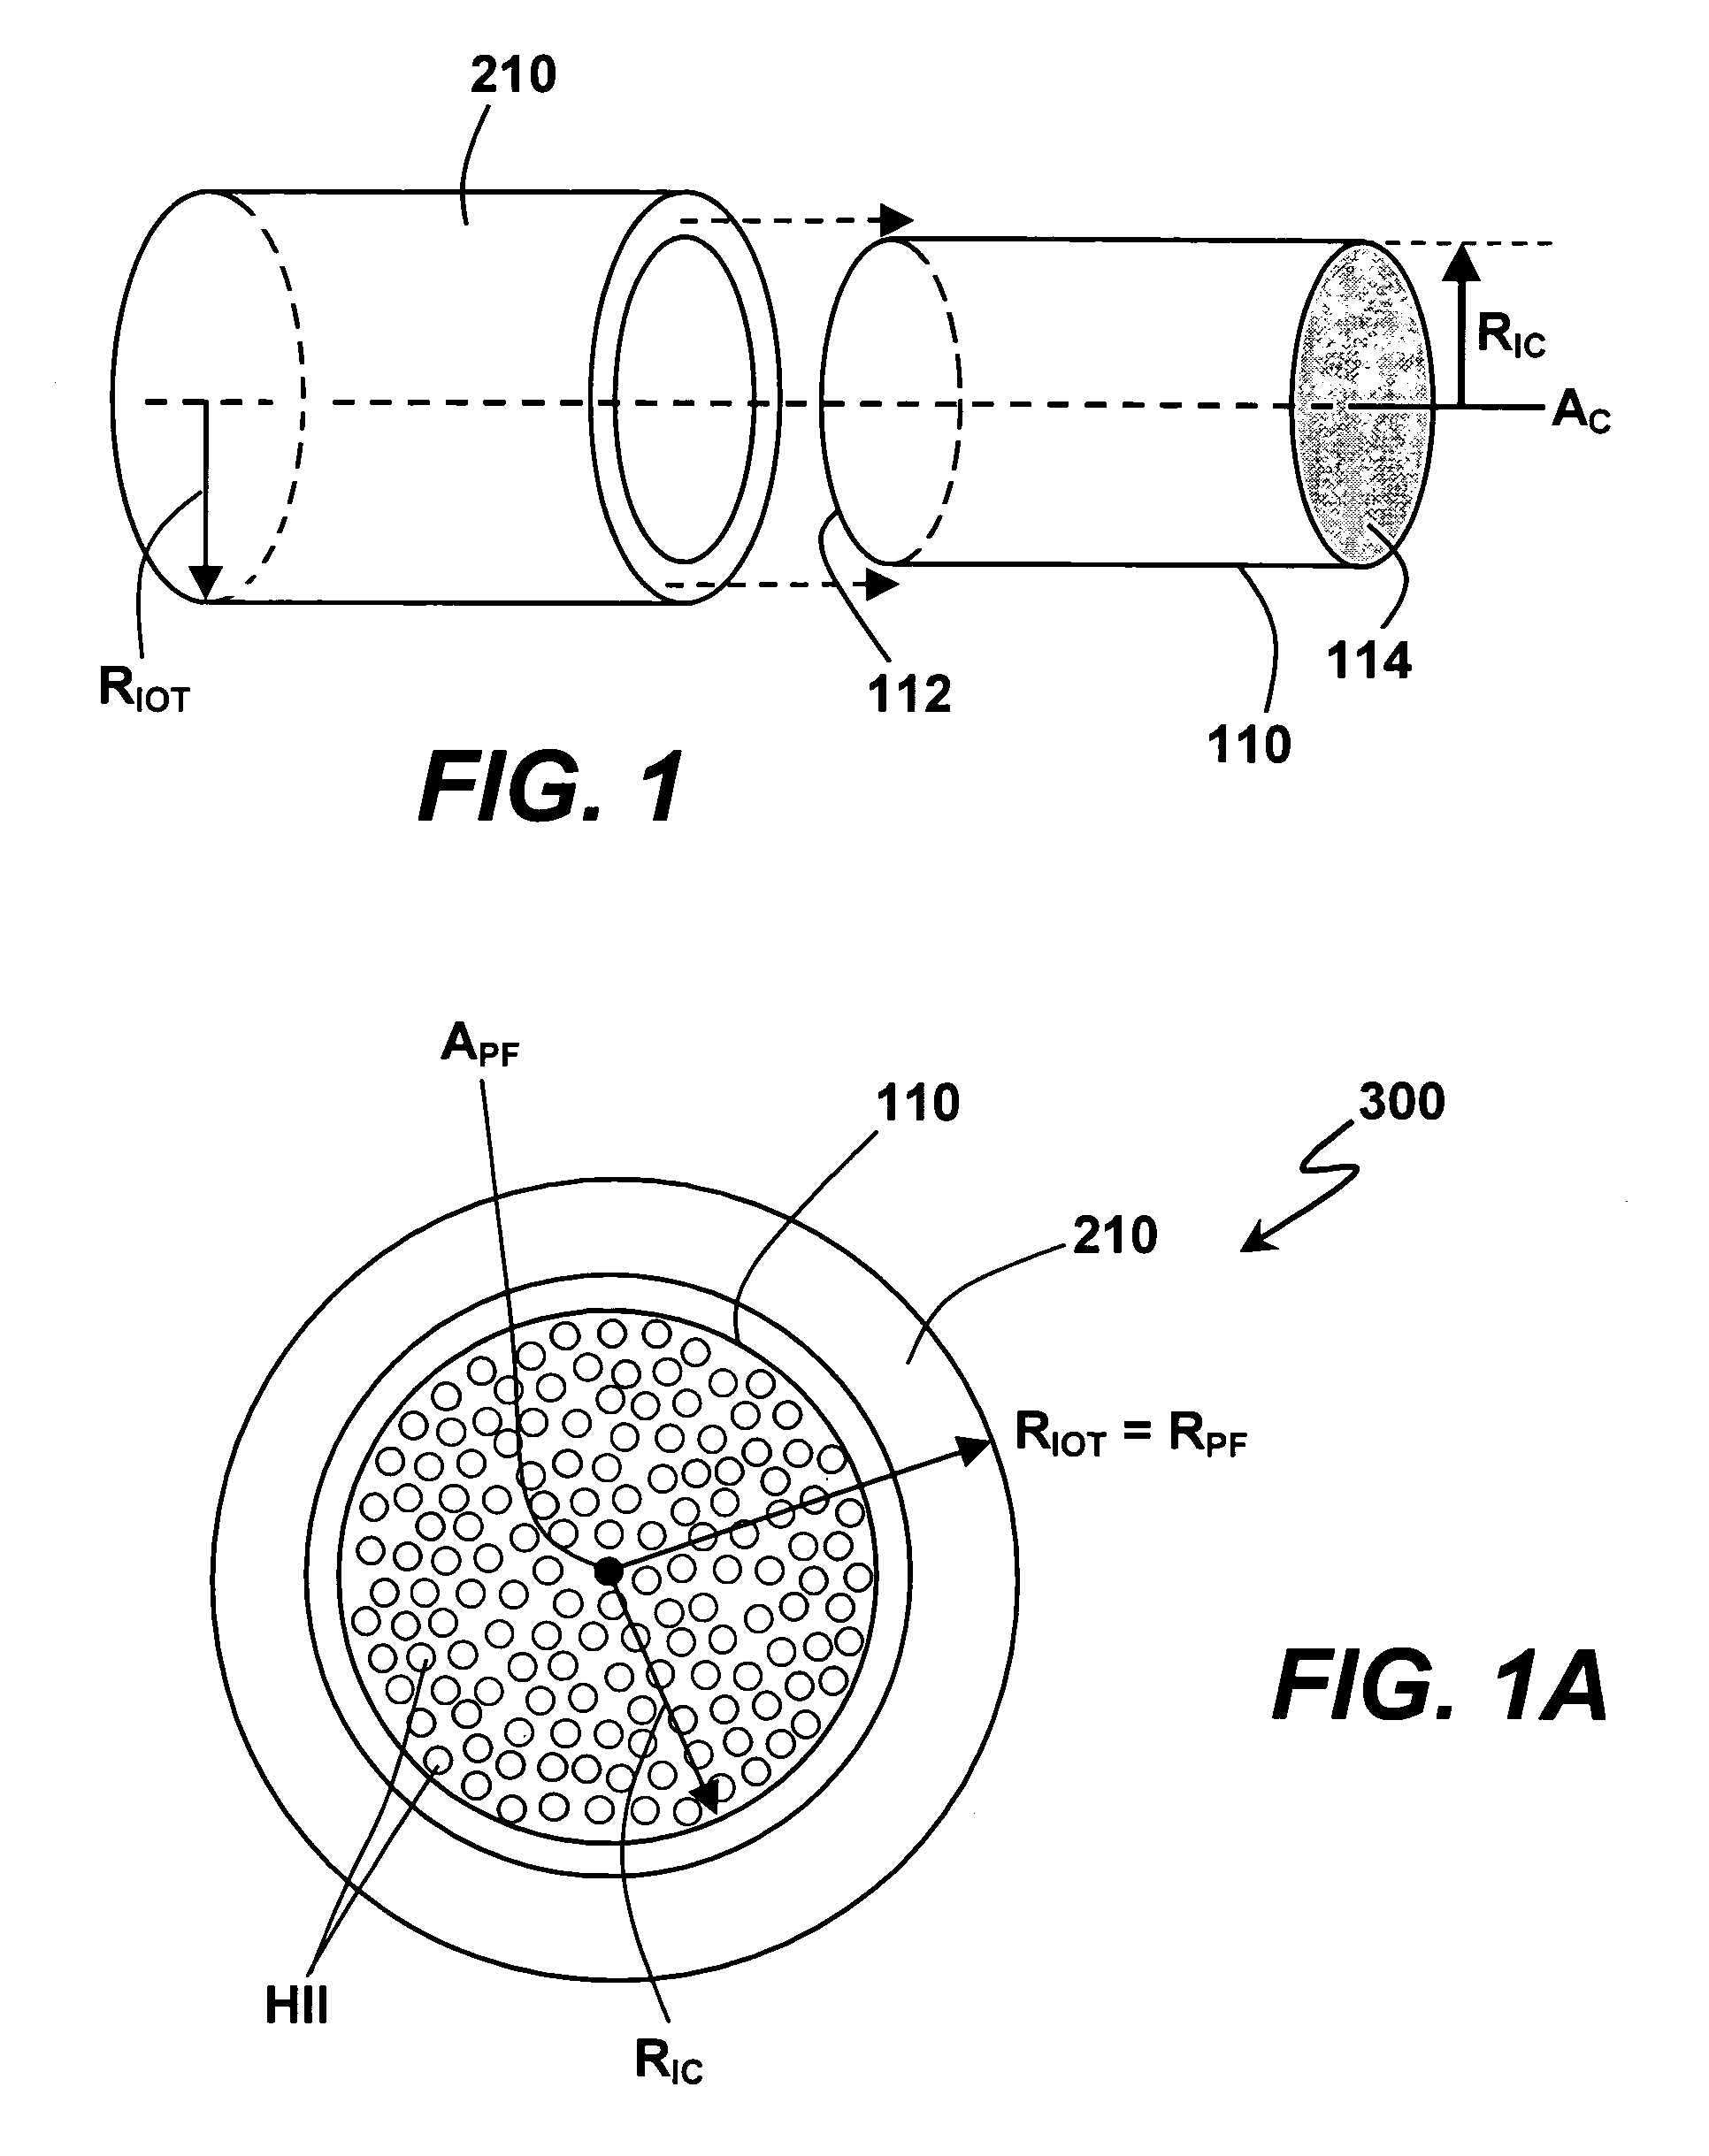 Graded refractive index optical fibers, optical components fabricated to include plural graded index optical fibers and methods of fabricating the same